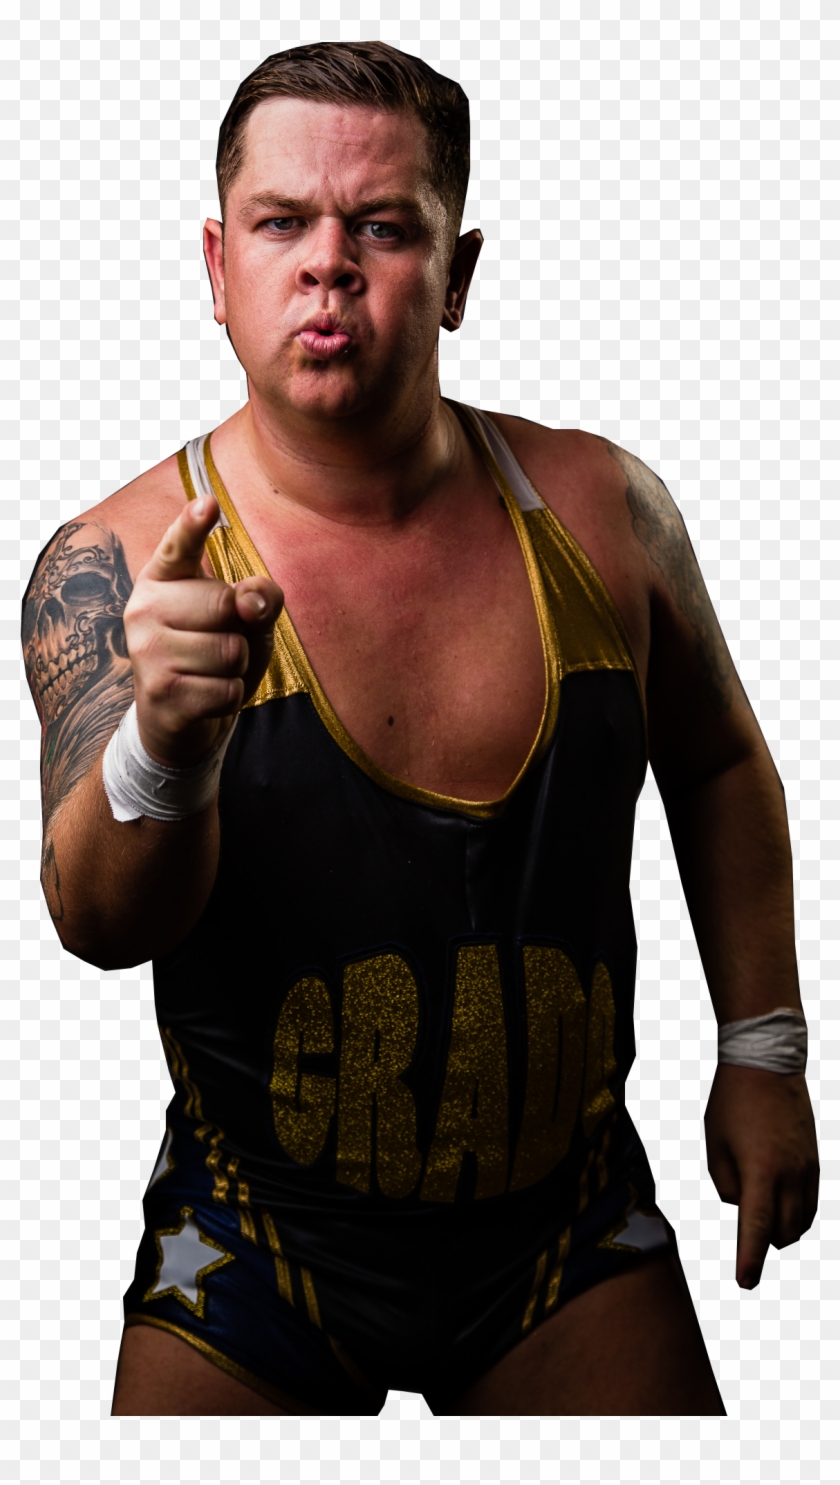 Grado Is Ready For Action At The Hydro - Wrestler Clipart #2679574